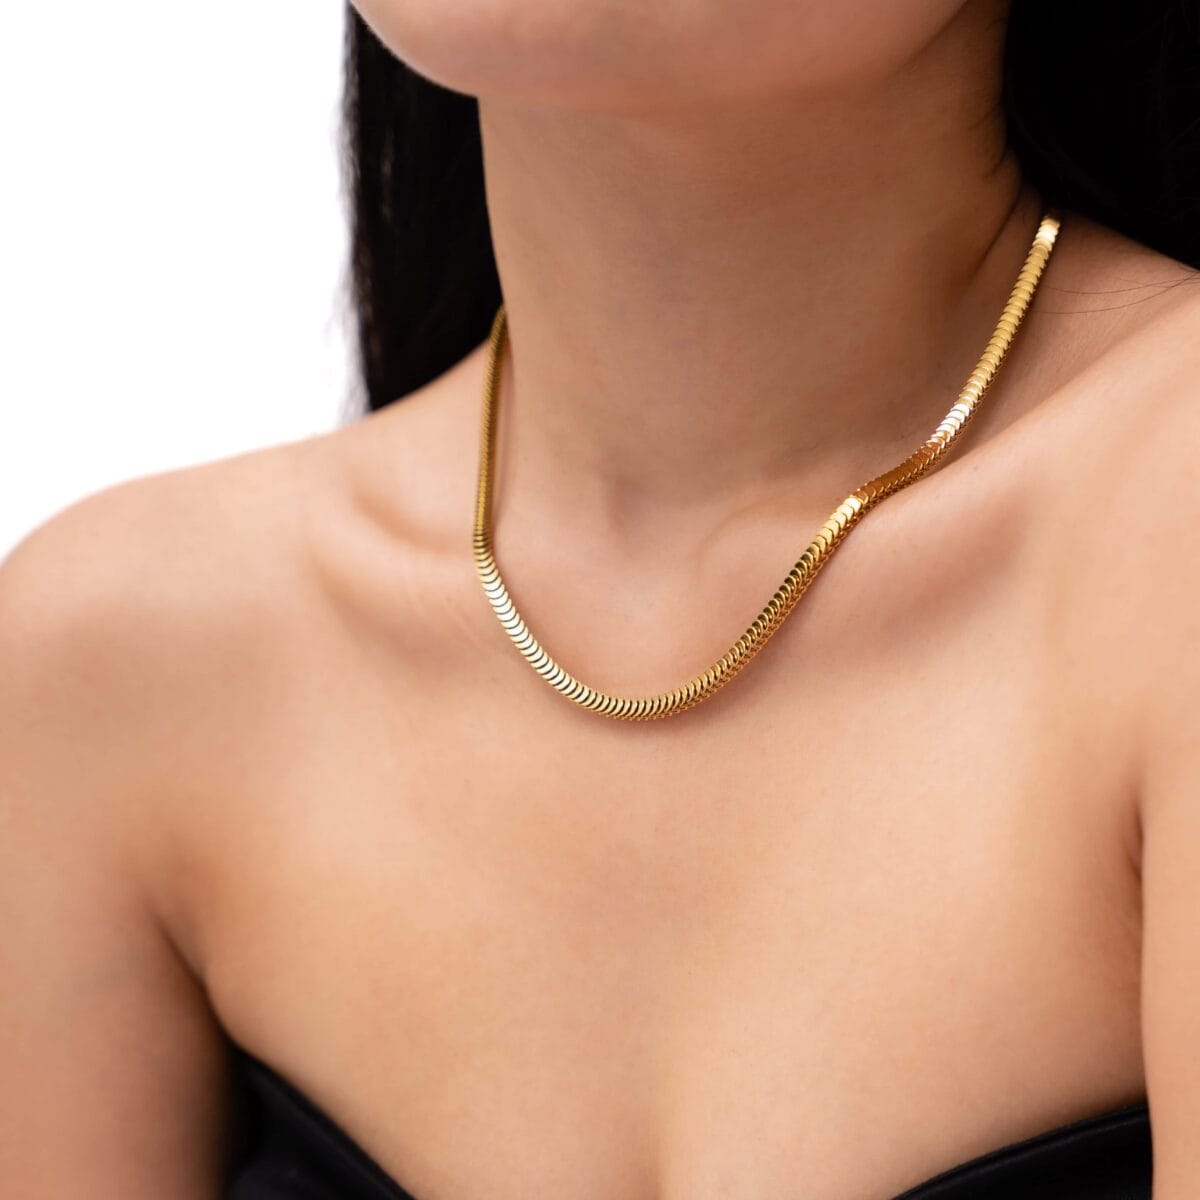 https://m.clubbella.co/product/gold-pleated-chain-statement-necklace/ DSC09350